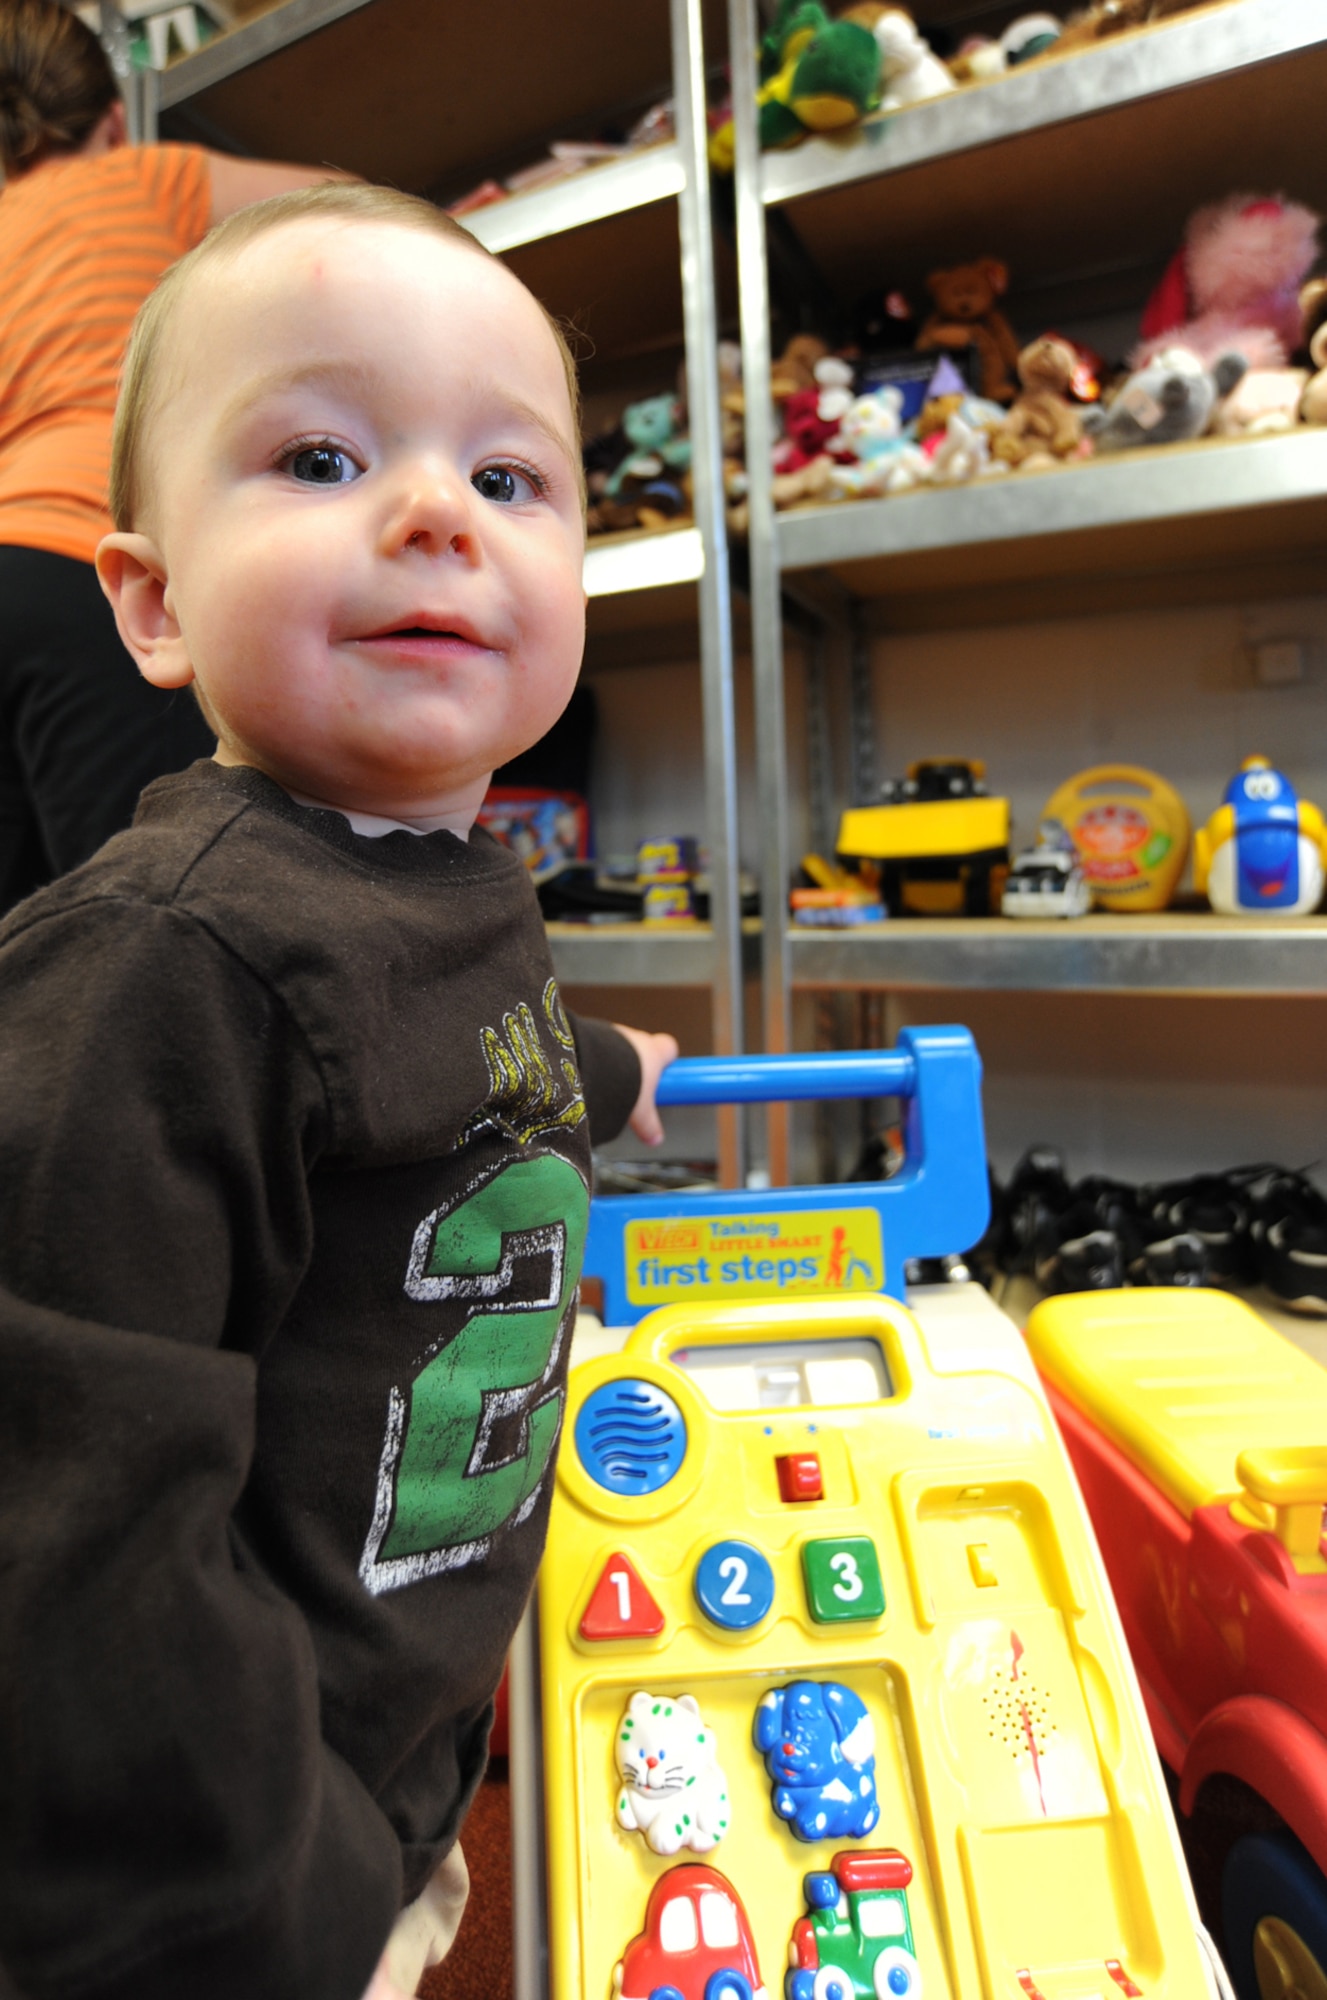 Michael Schneider, 1-year-old, plays with a toy while his mother, Gabby Schneider, views merchandise at the Airman’s Attic, March 12, 2010, McConnell Air Force Base, Kan. The Airman’s attic offers free appliances, clothes, children’s toys, baby items and other products for servicemembers E-5 and below. Hours of operation are Monday through Friday, 10 a.m. to 2 p.m. and donations are accepted at these times. (U.S. Air Force photo/Senior Airman Maria Ruiz)